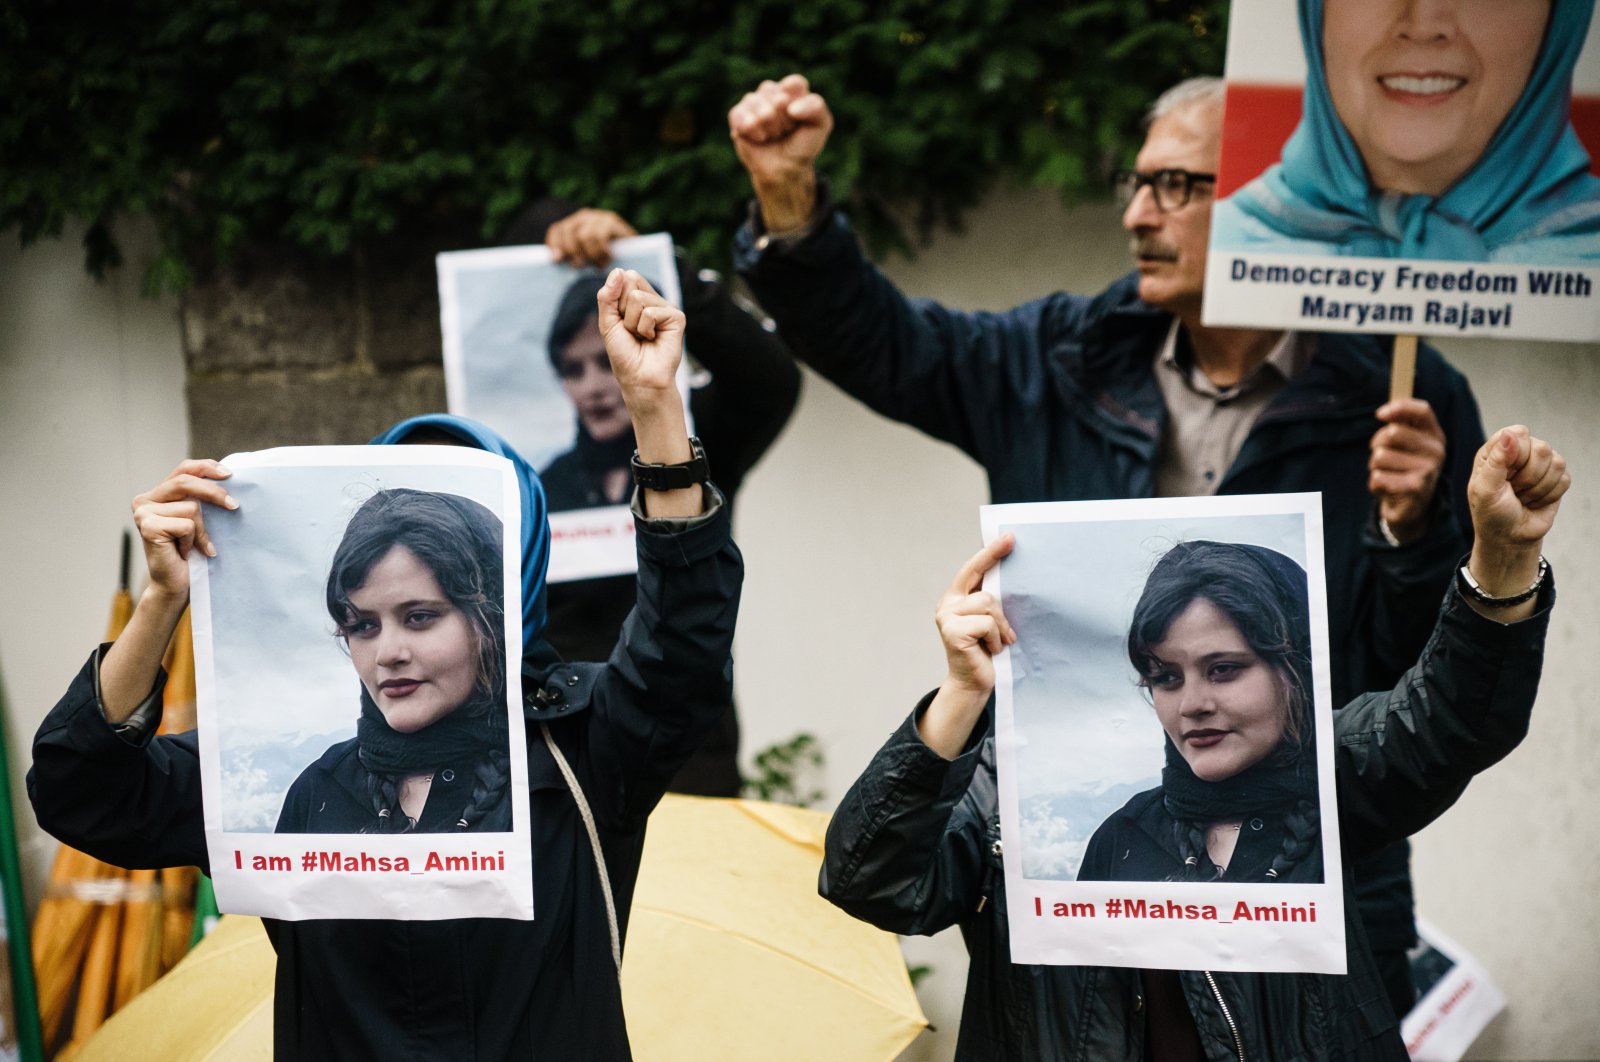 Protesters of the National Council of Resistance of Iran (NWRI) demonstrate with placards showing deceased Mahsa Amini, in front of the Islamic Republic of Iran Embassy in Berlin, Germany, Sept. 20, 2022. (EPA/CLEMENS BILAN)